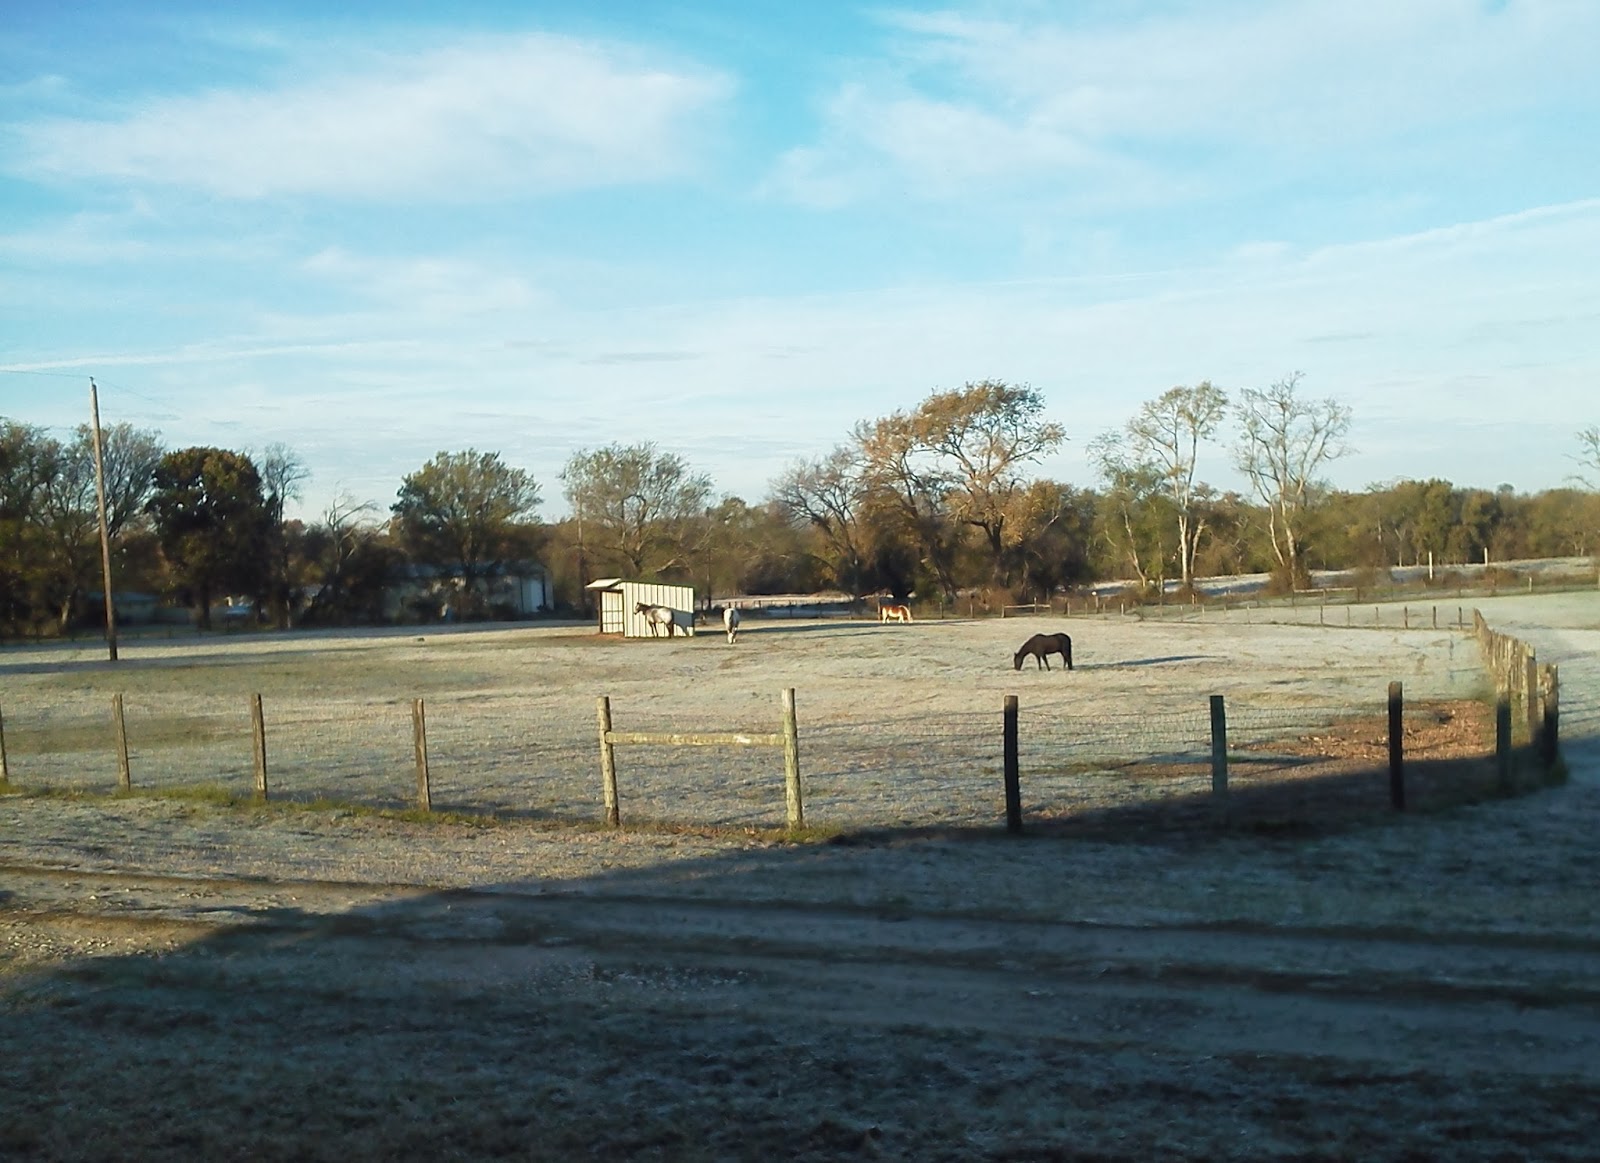 Shadow Ranch Therapeutic Riding Center: Just Pics